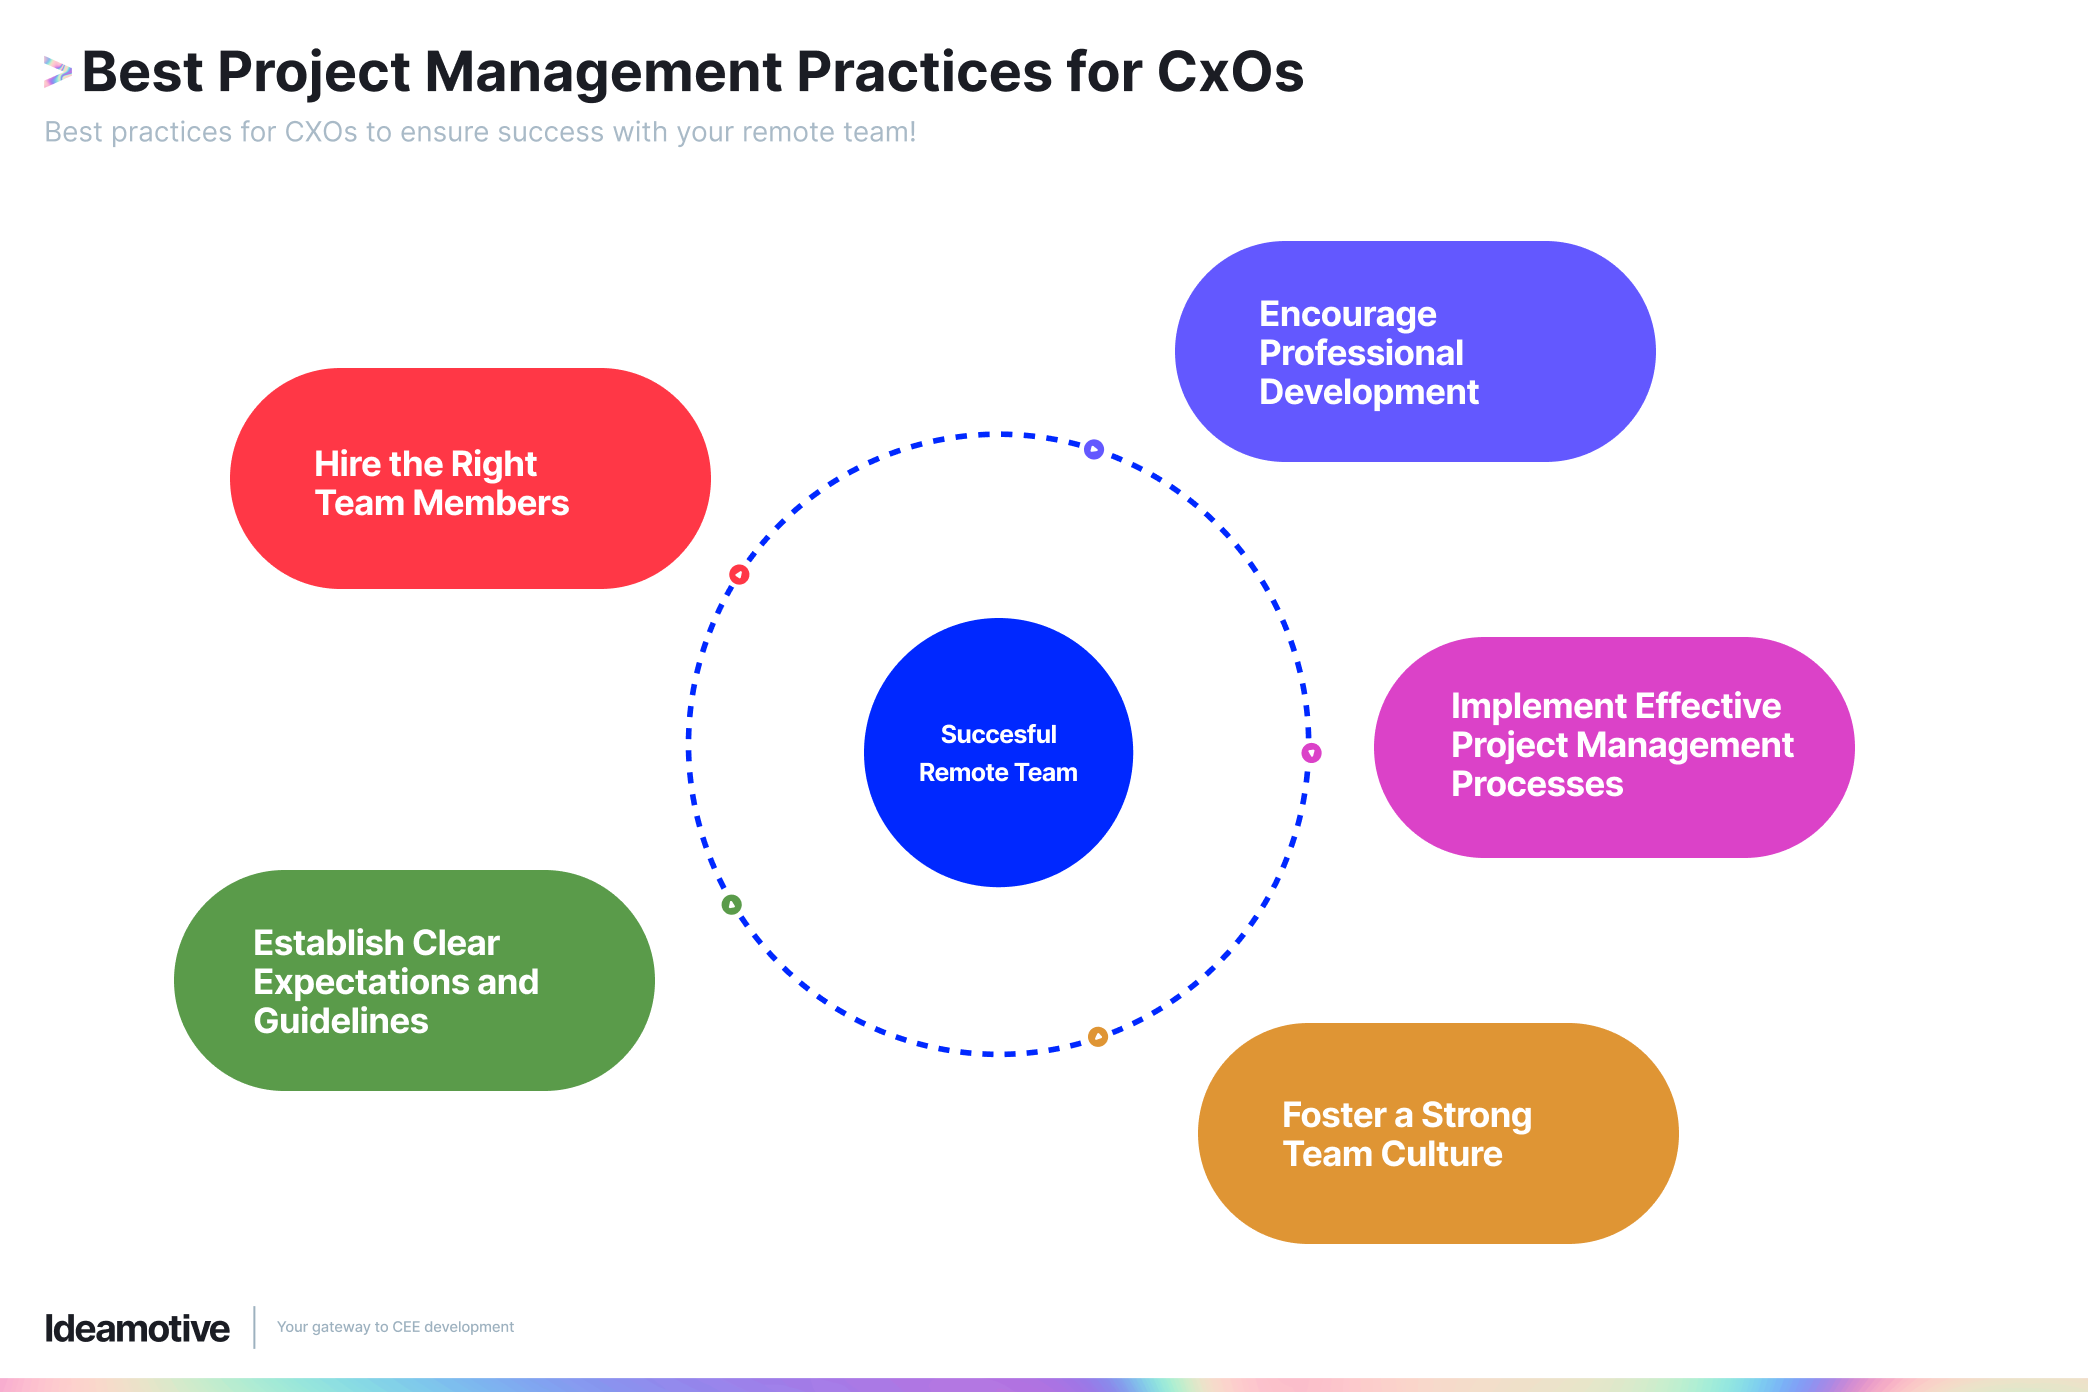 Best Project Management Practices for CxOs